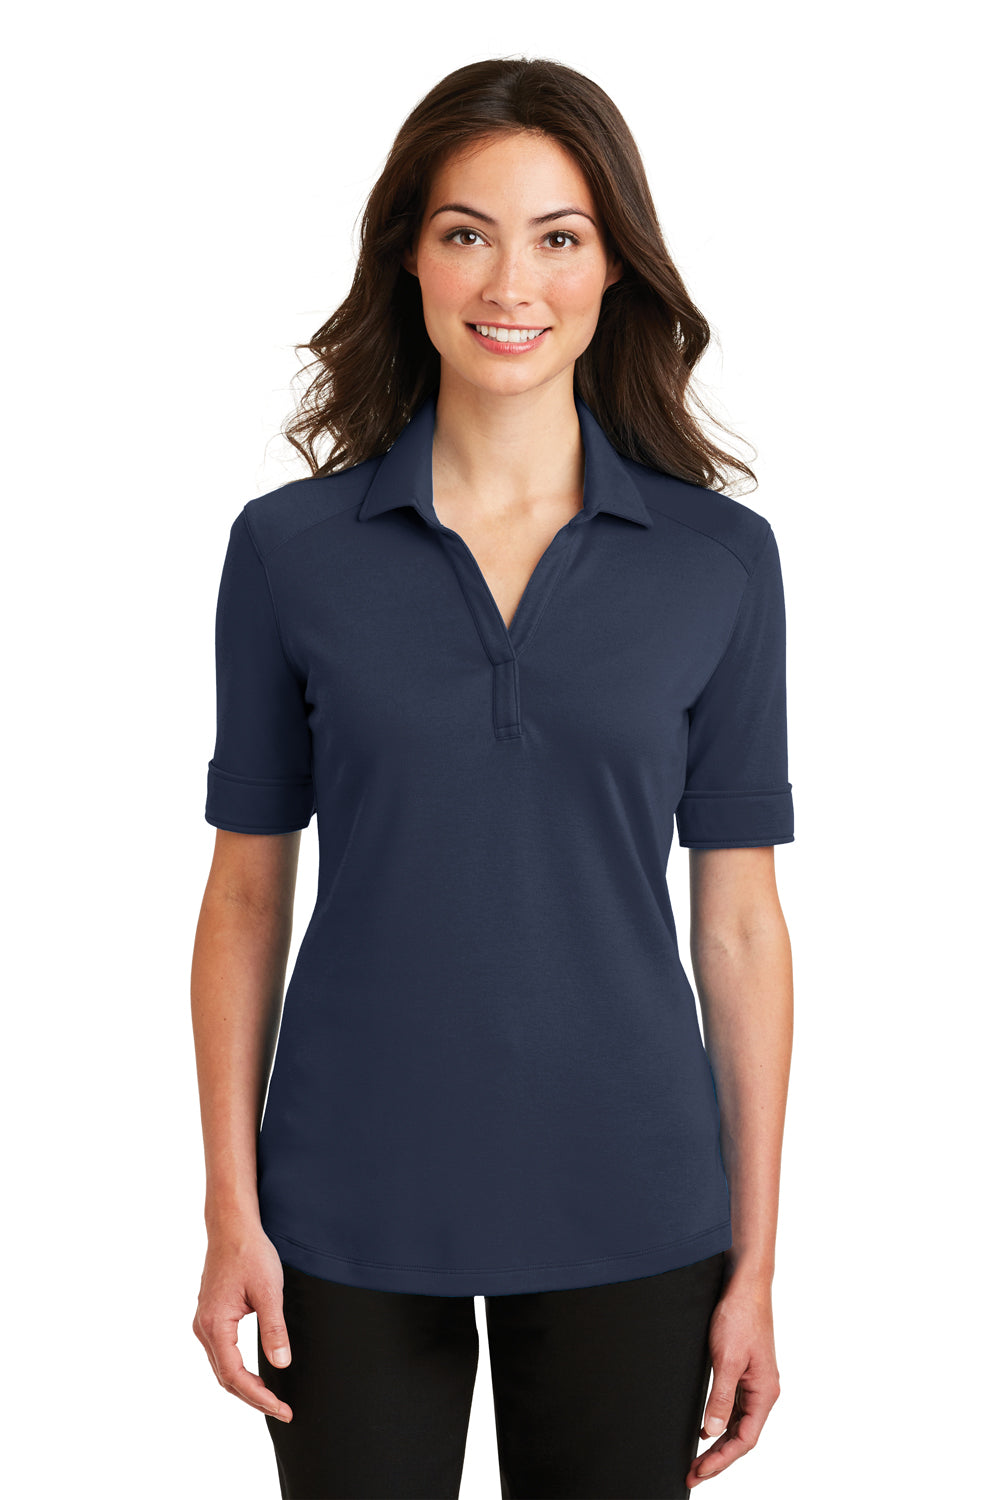 Port Authority L5200 Womens Silk Touch Performance Moisture Wicking Short Sleeve Polo Shirt Navy Blue Front